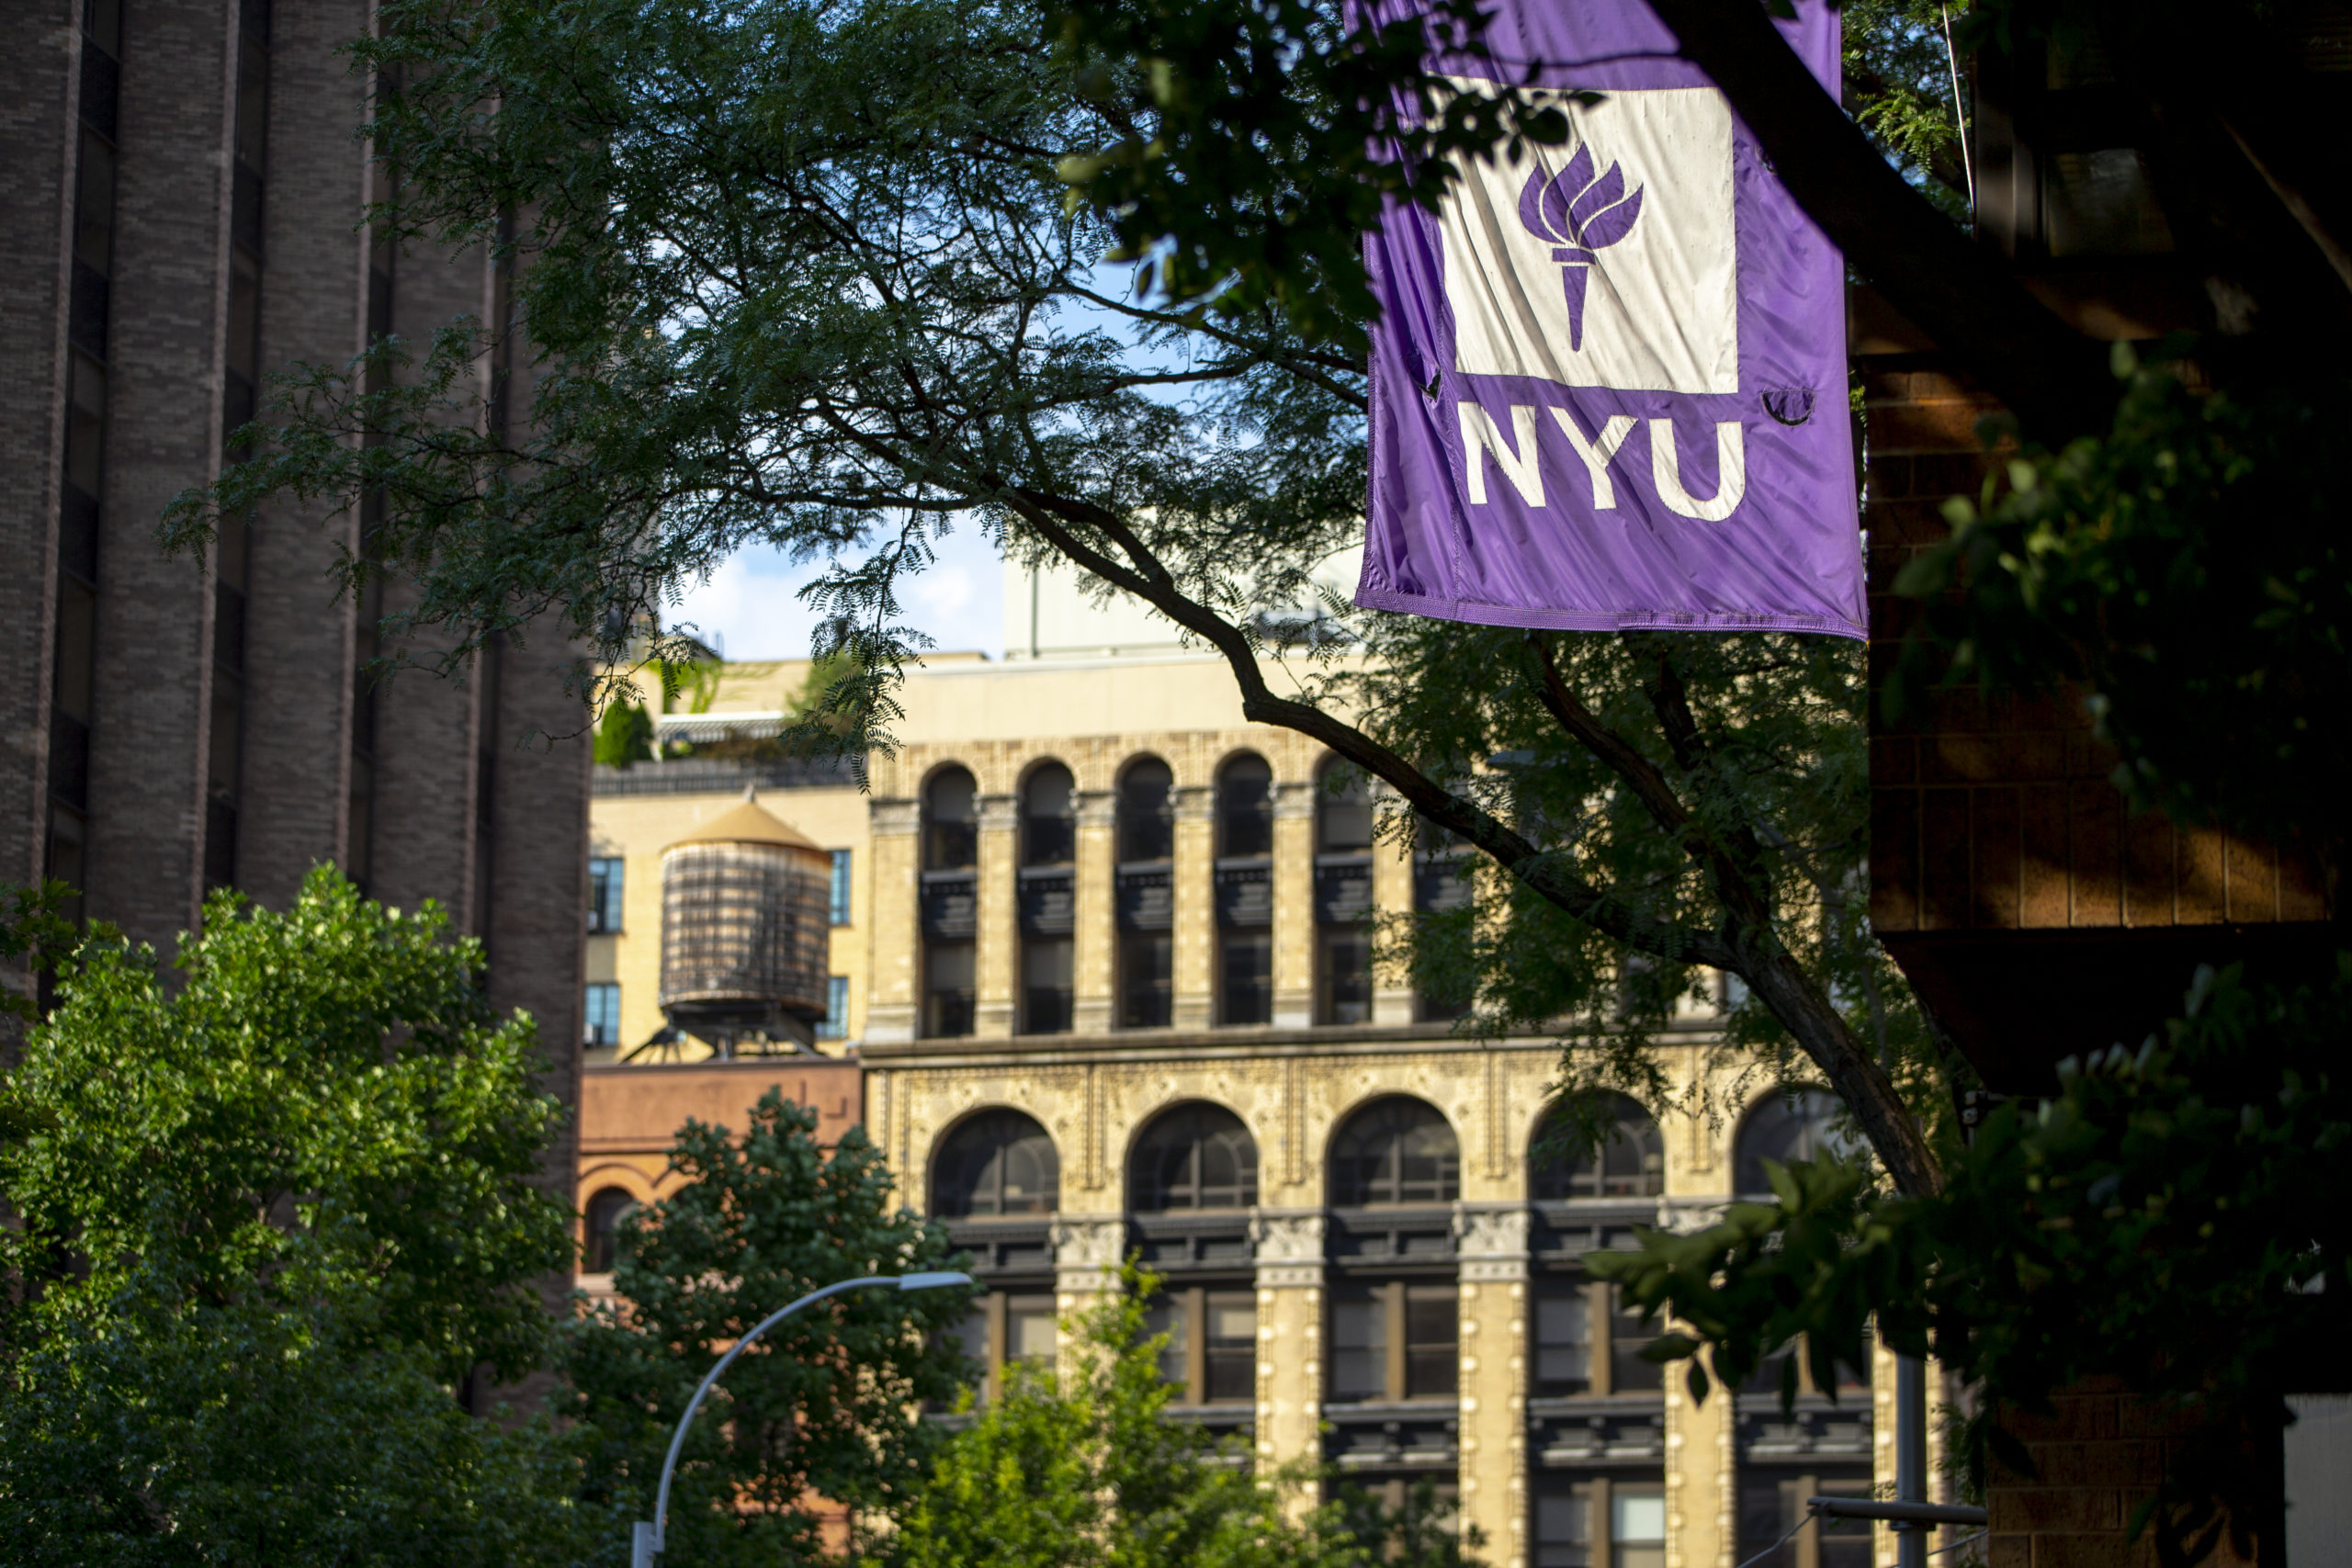 NYU campus buildings and flag.